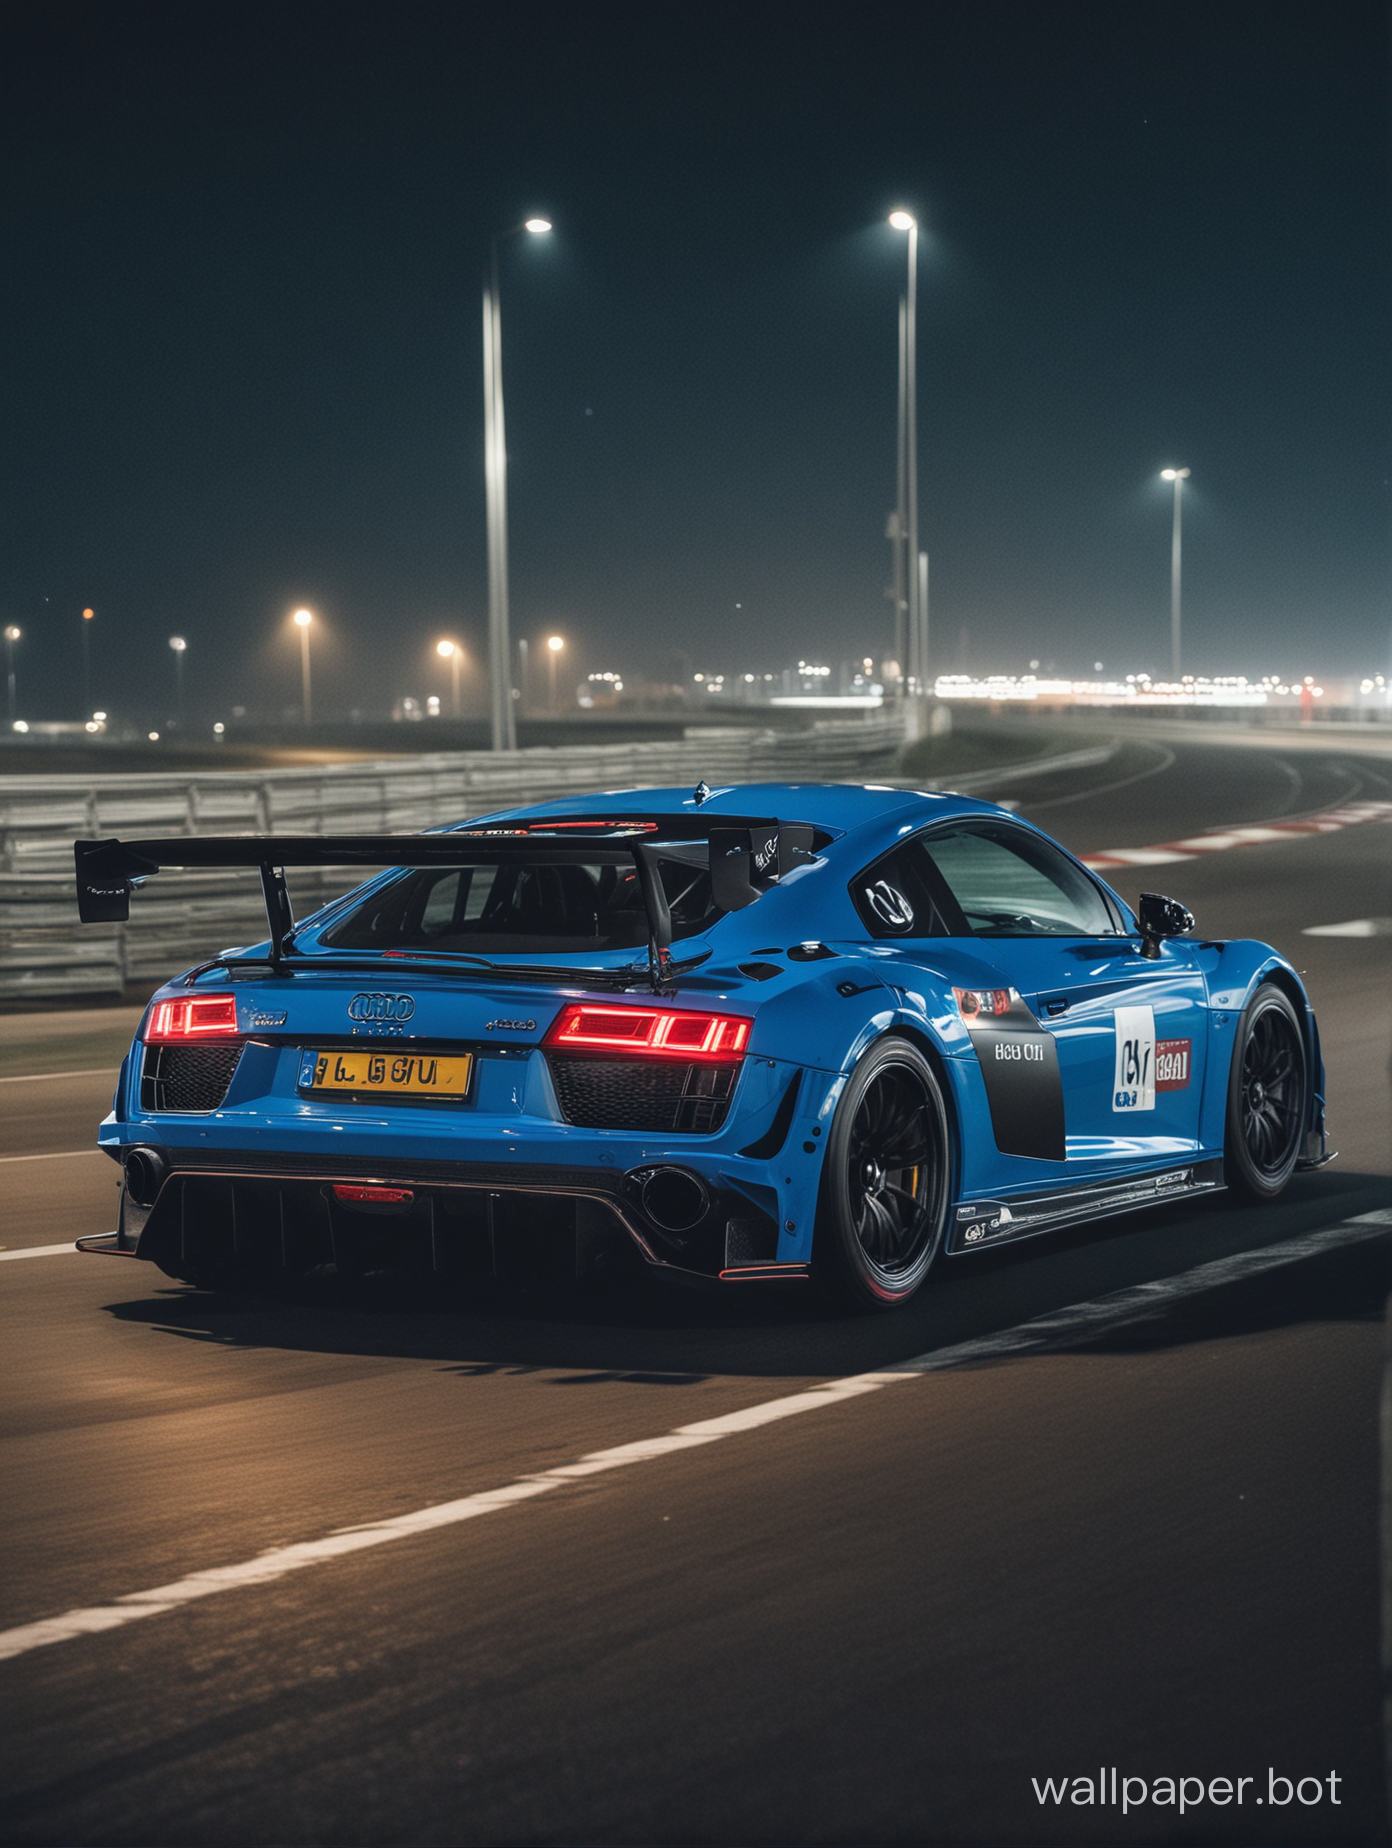 Blue audi r8 gt3 driving at night